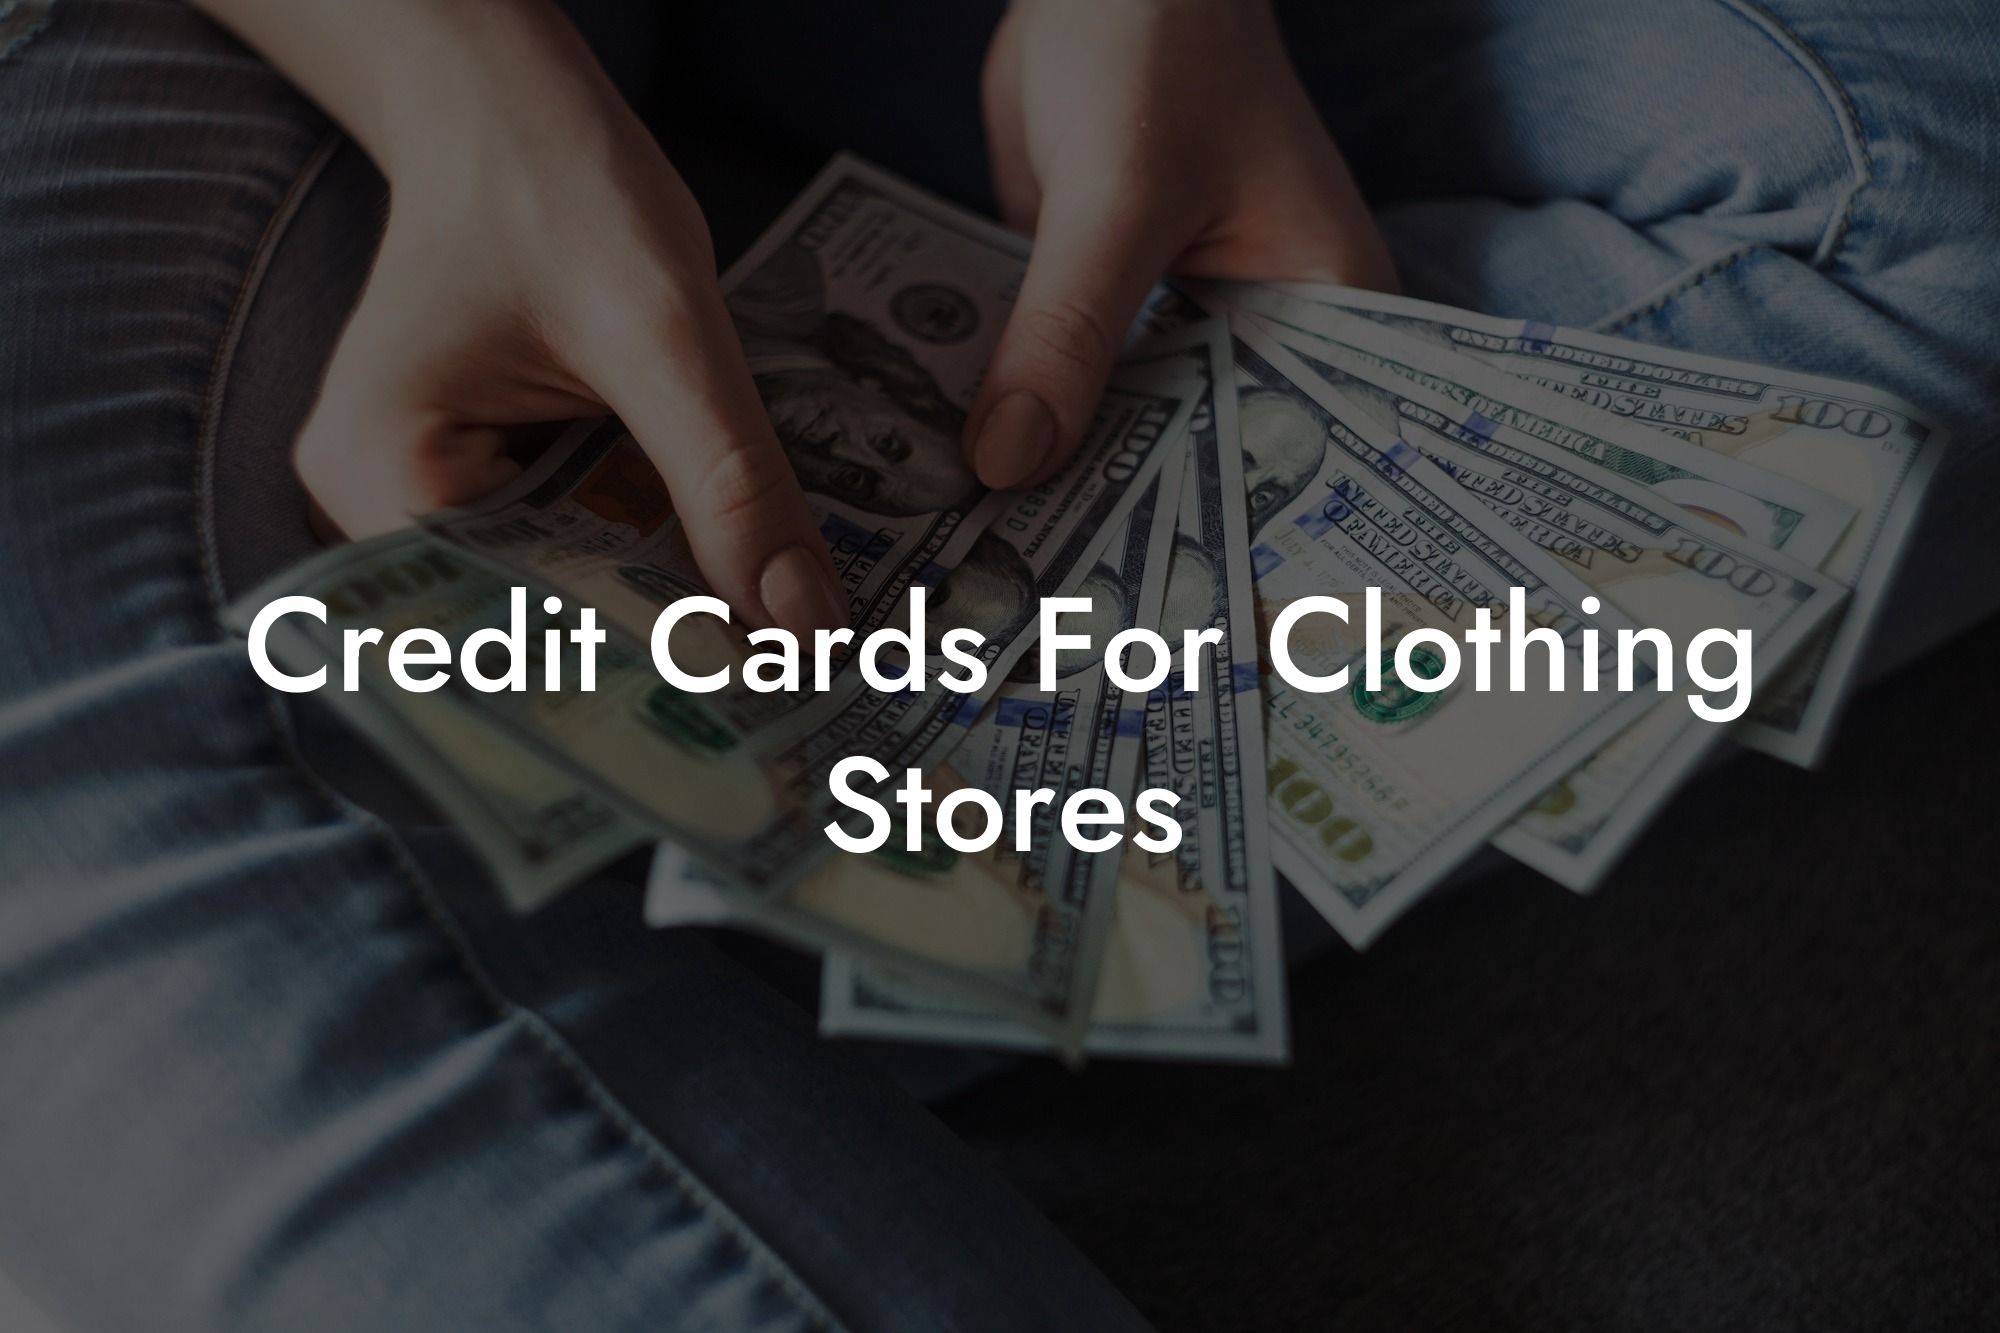 Credit Cards For Clothing Stores